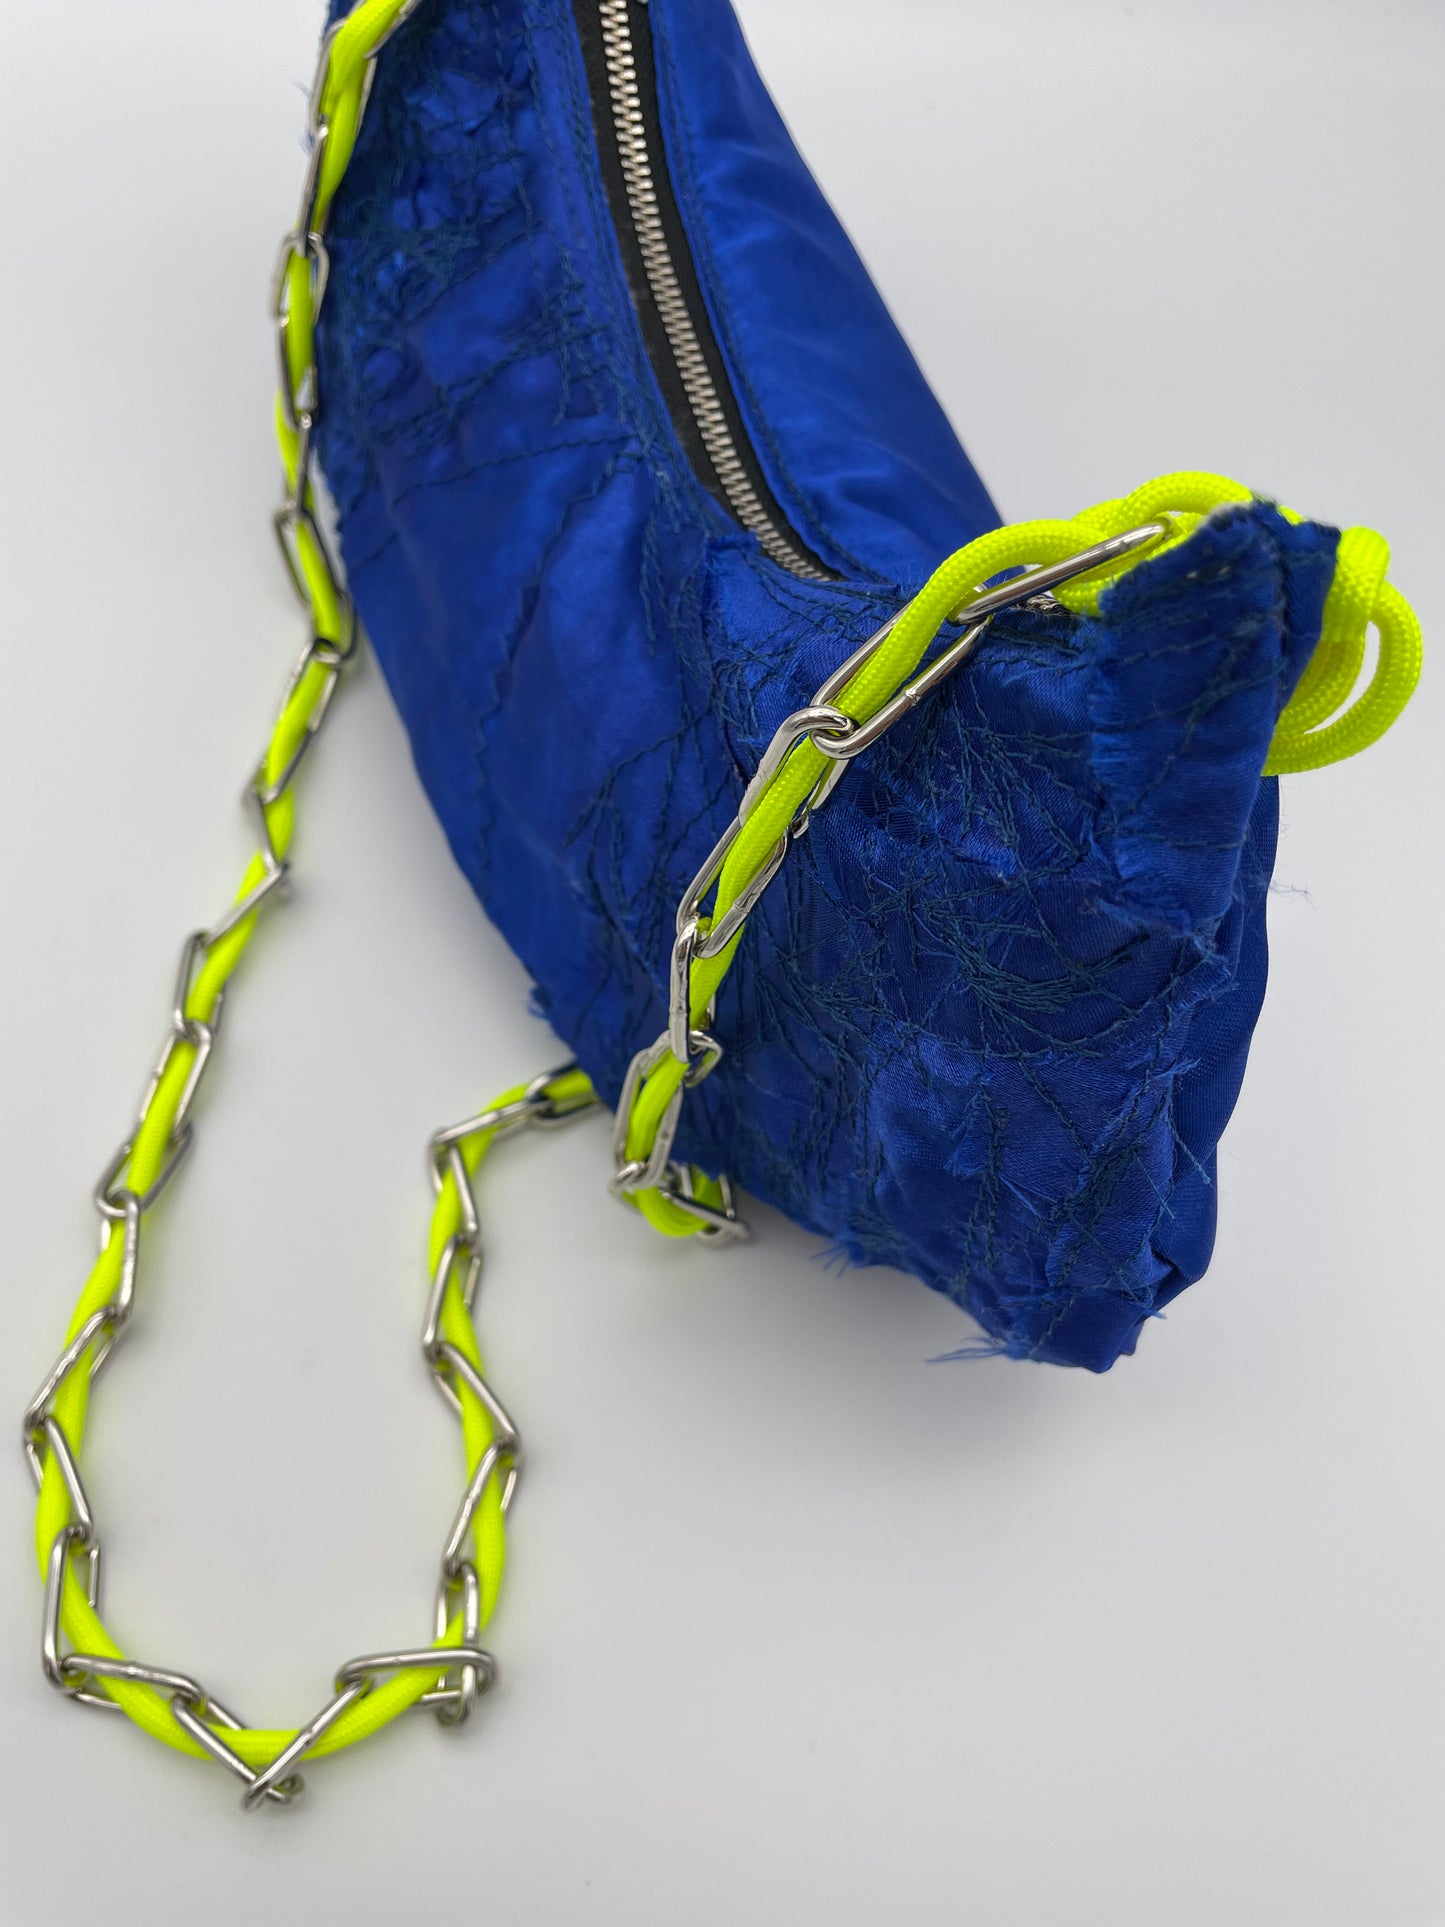 Upcycling bag royal blue neon yellow handmade patchwork fabric scraps